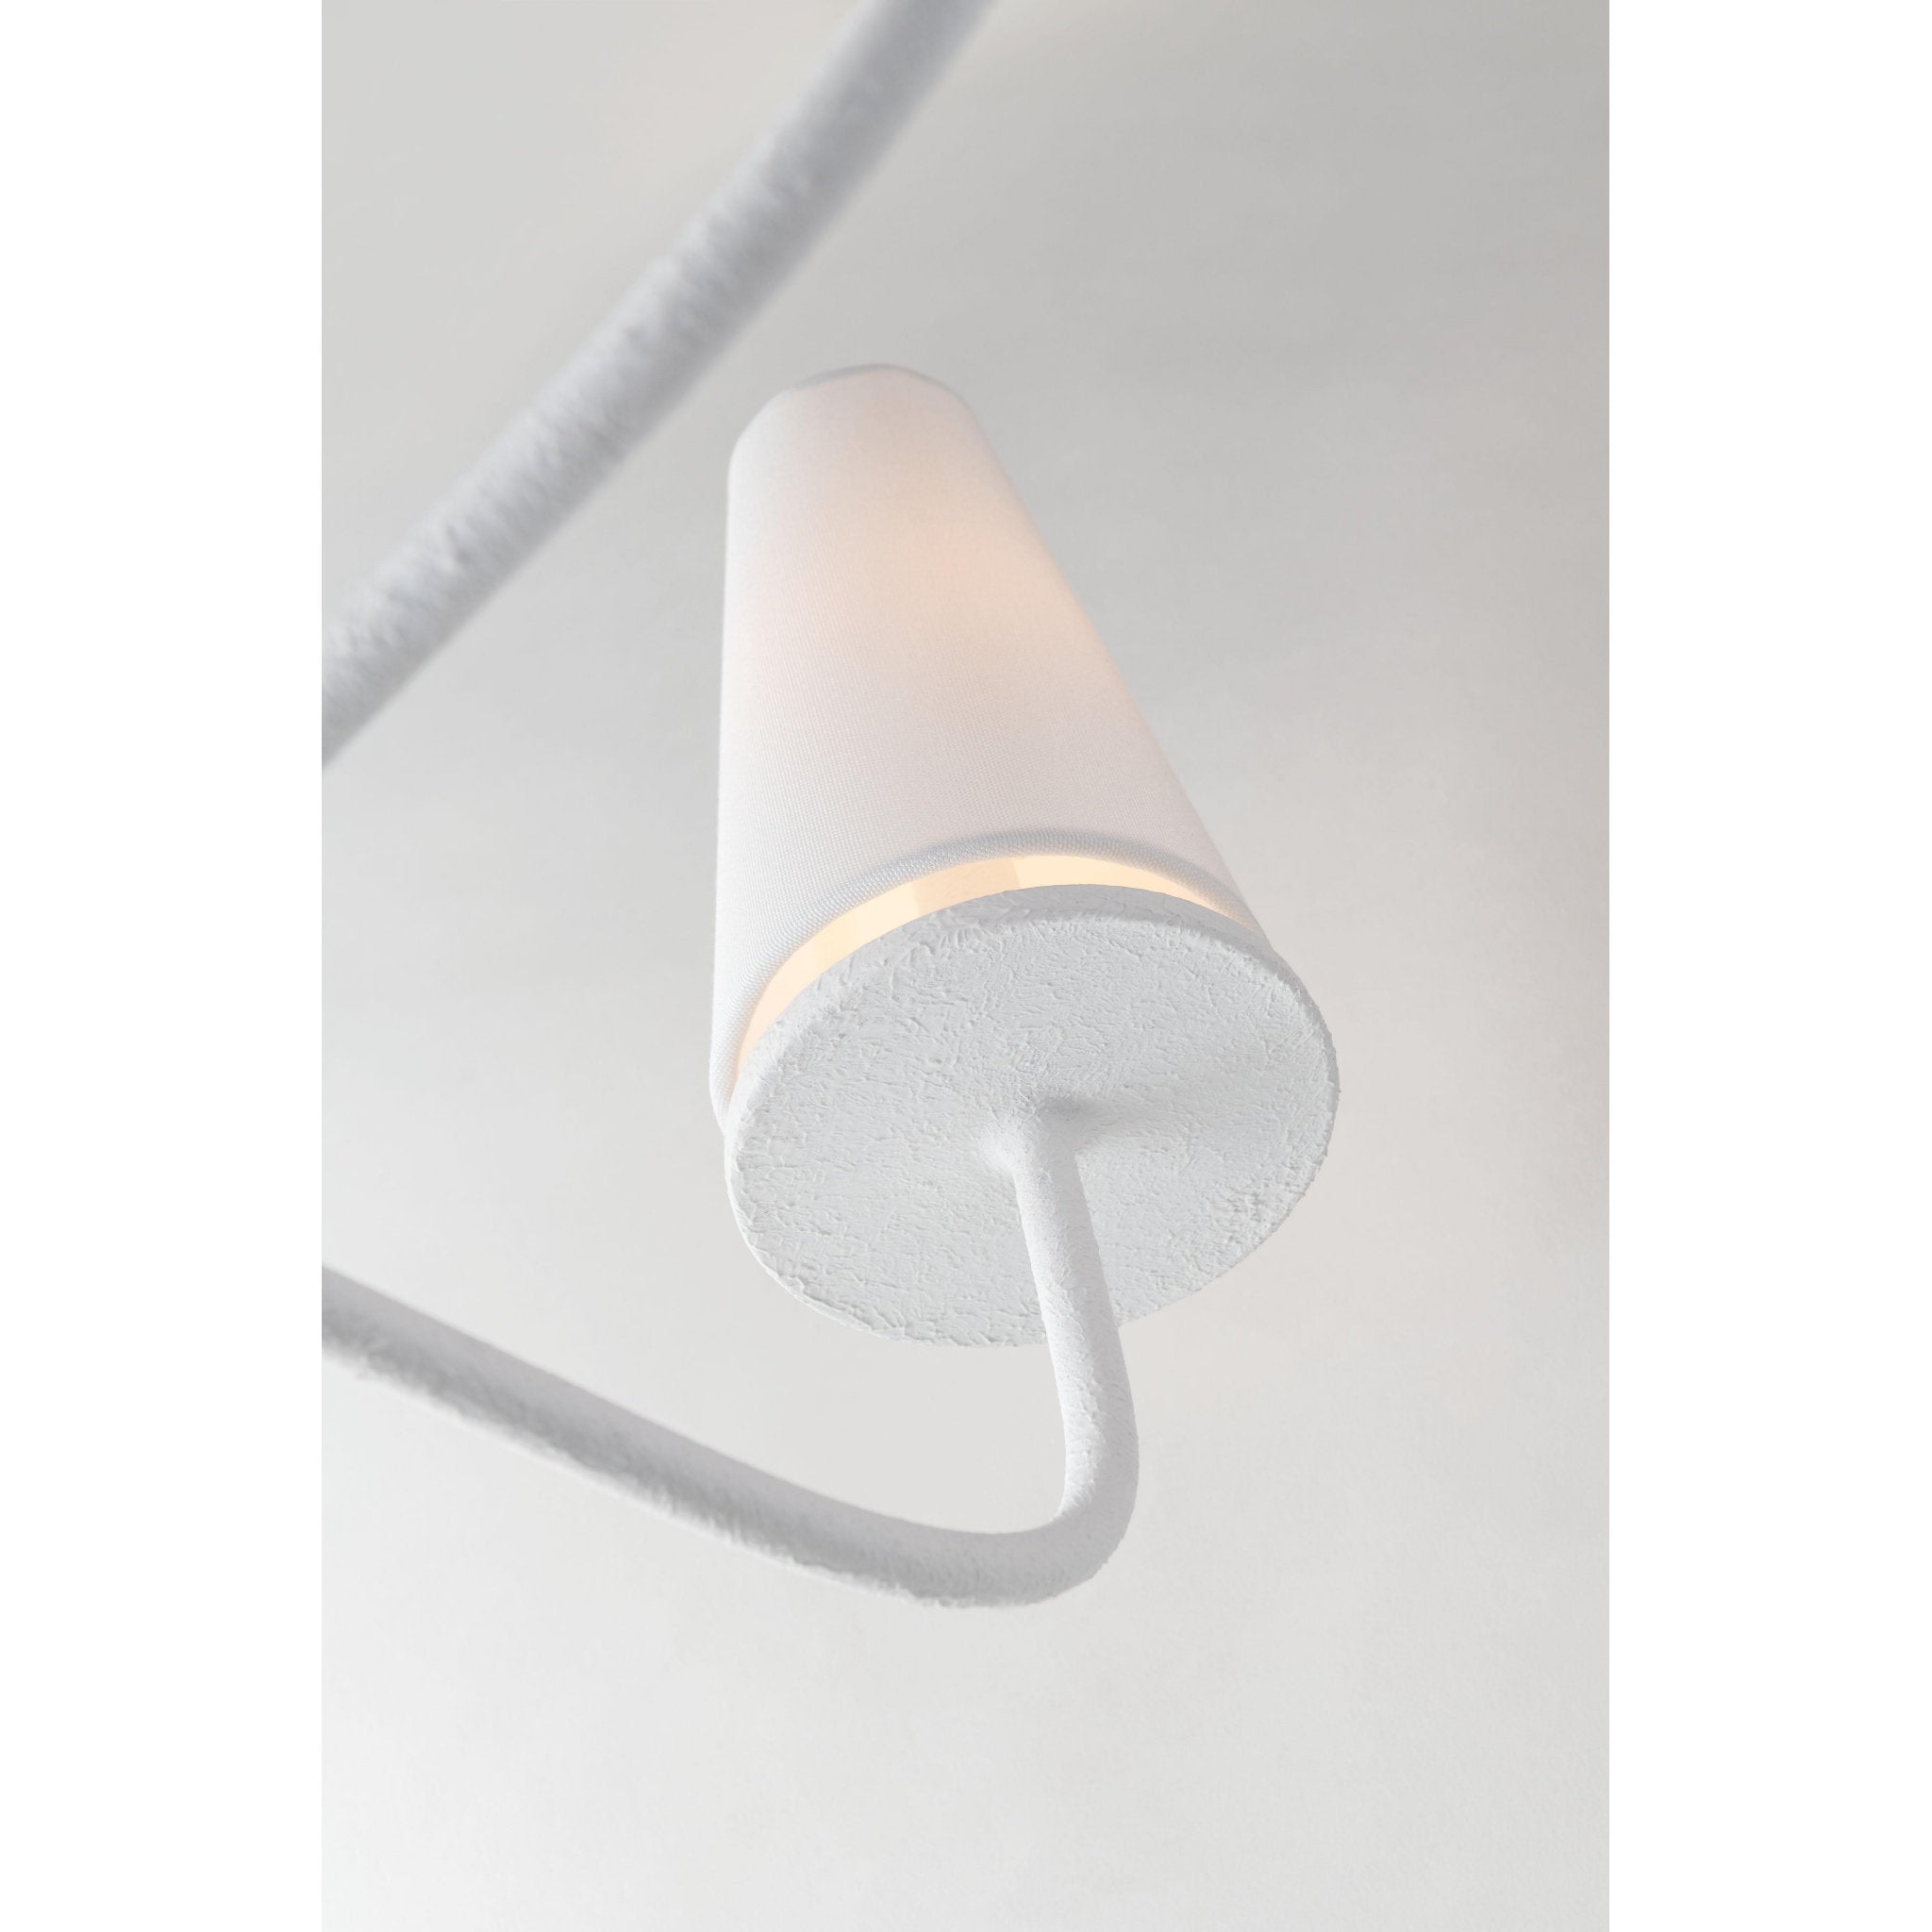 Marcel 1 Light Wall Sconce in Gesso White